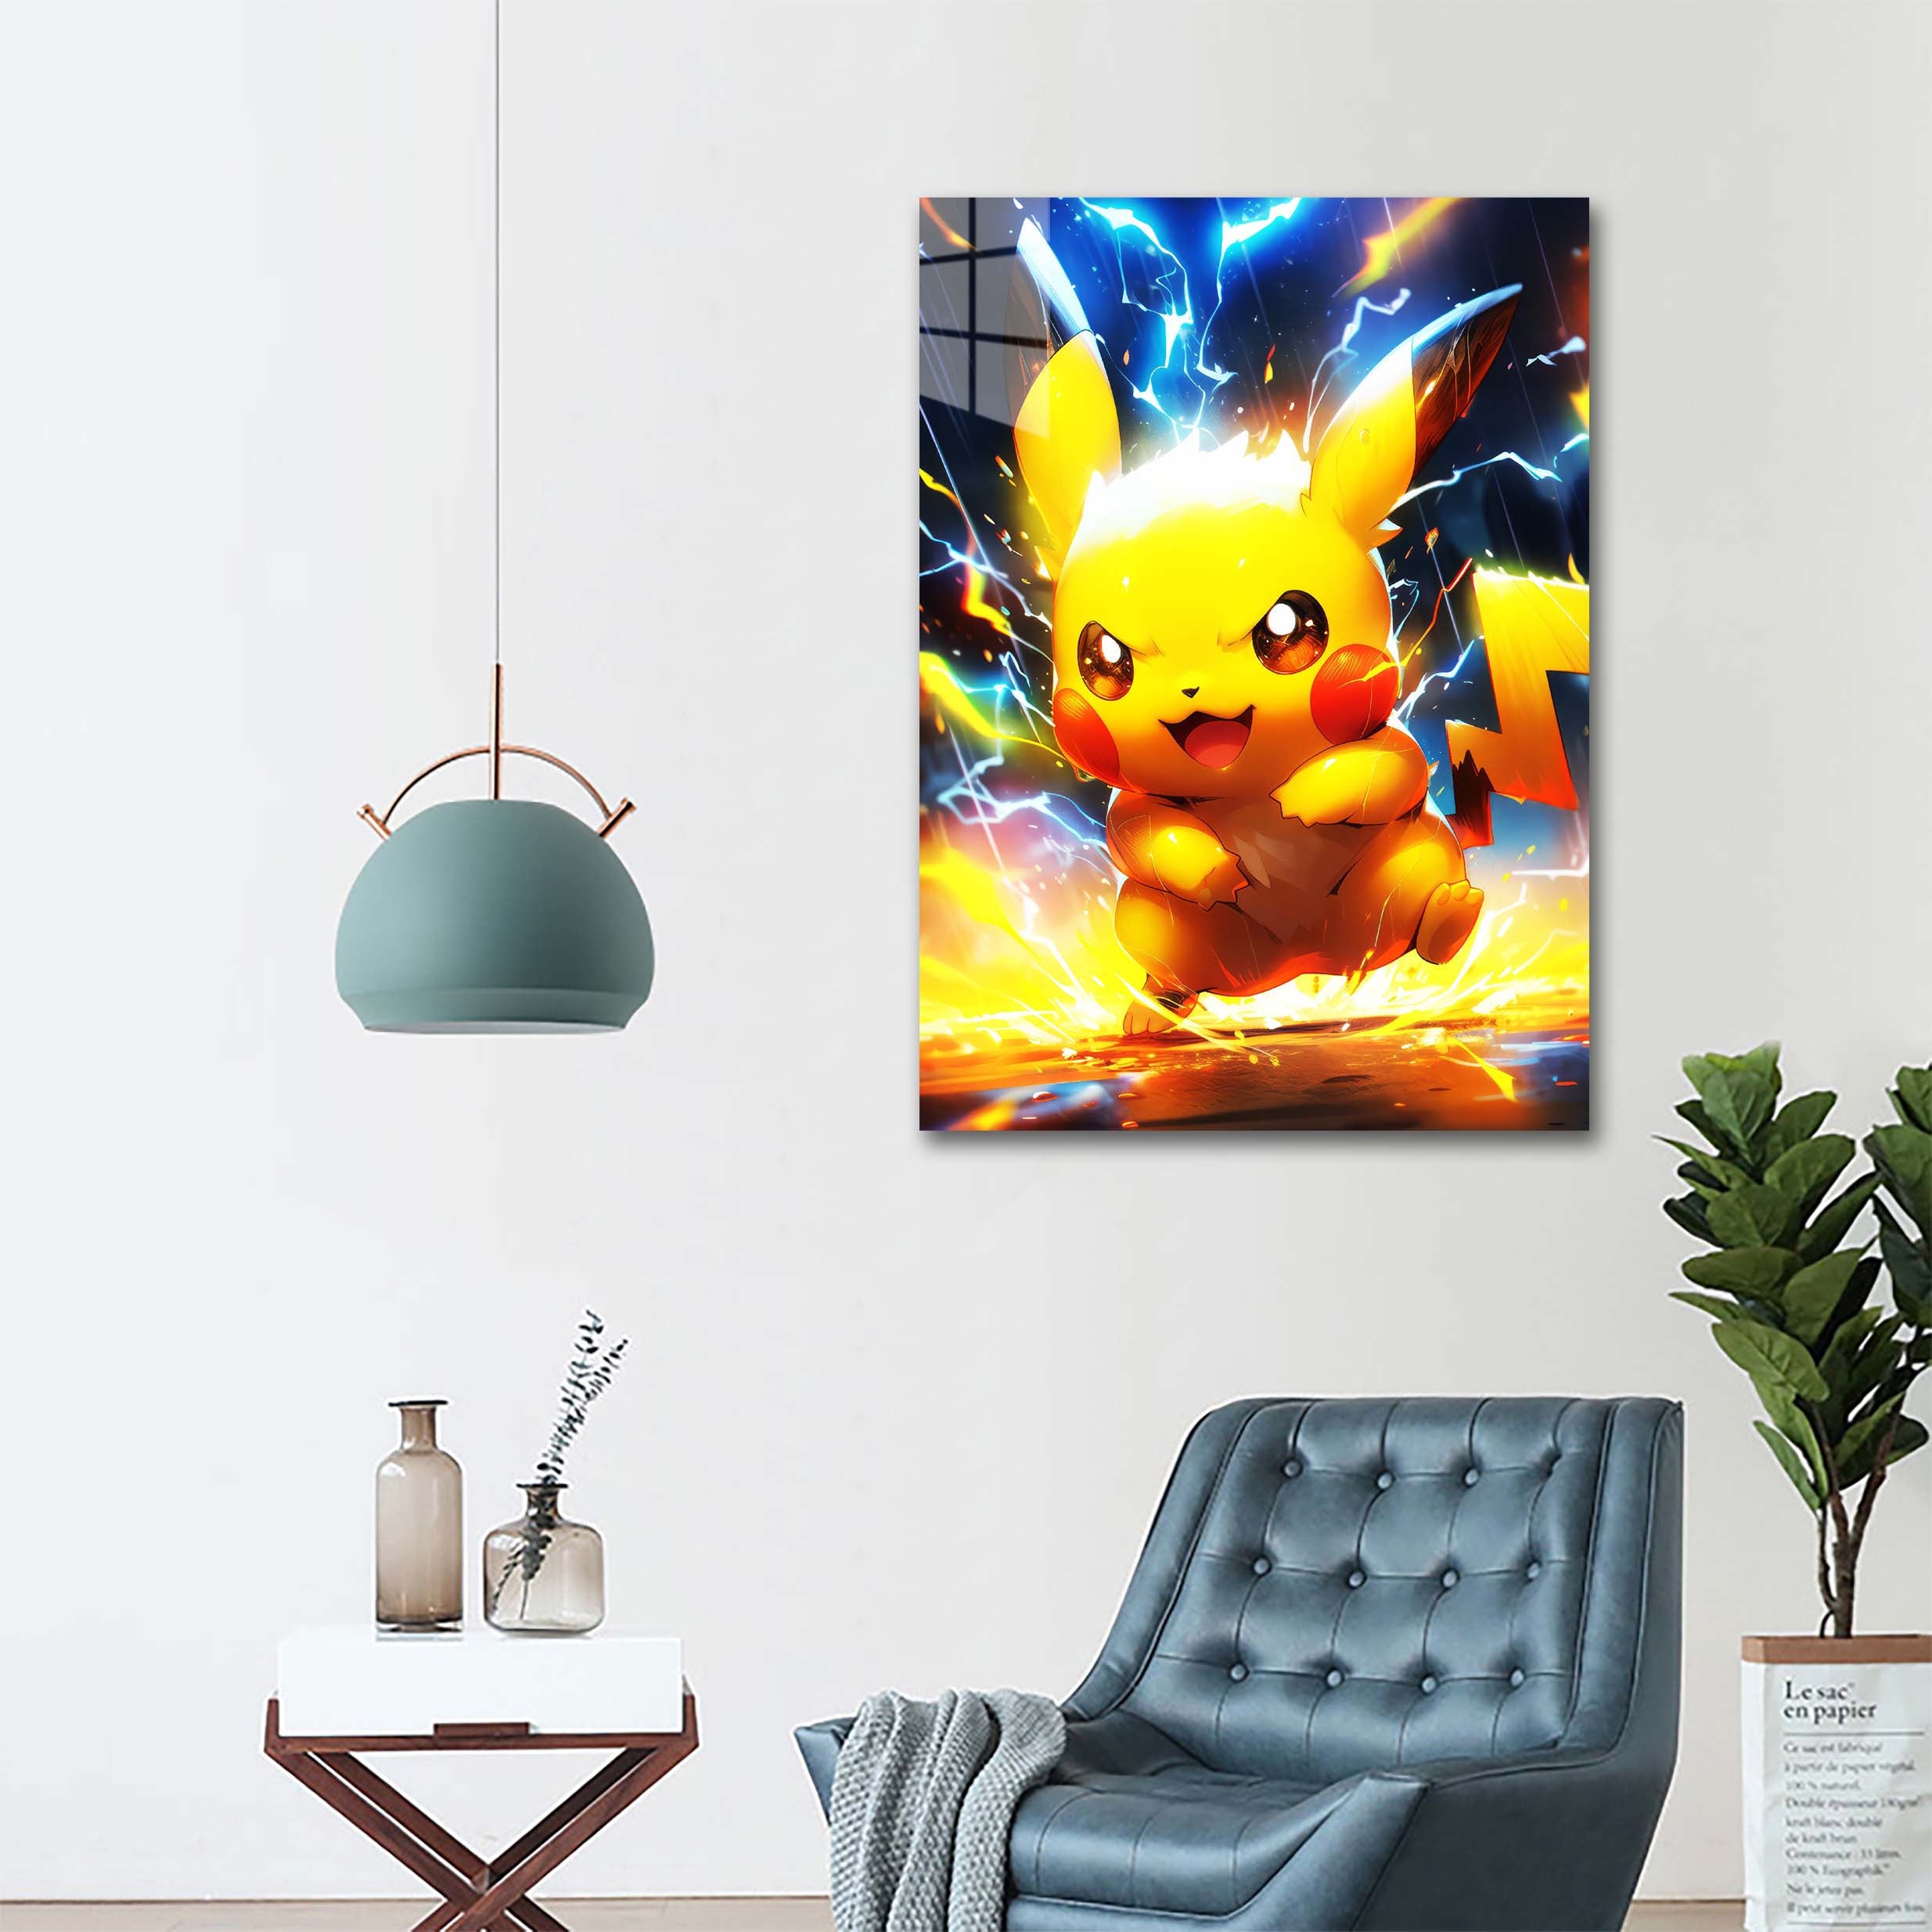 Pikachu - Thunderbolt! -designed by @EosVisions